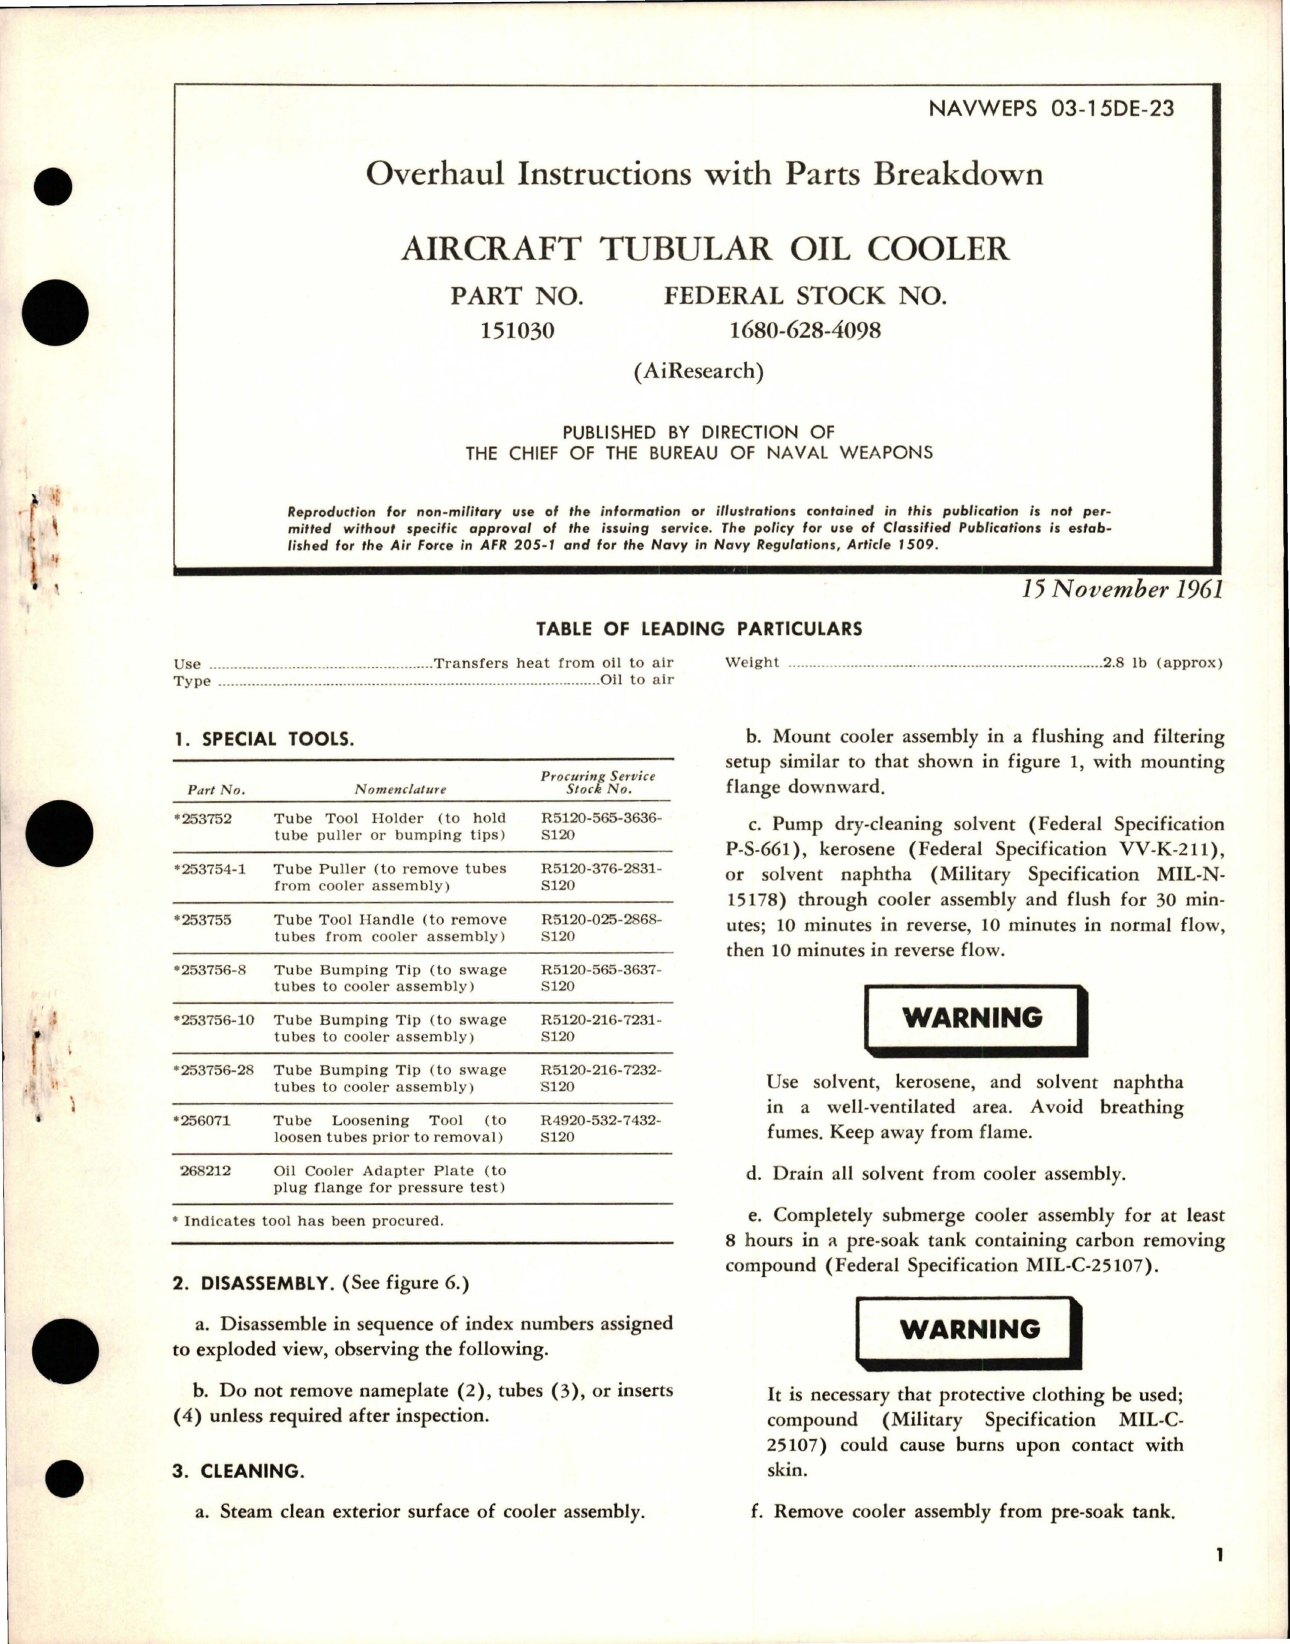 Sample page 1 from AirCorps Library document: Overhaul Instructions with Parts Breakdown for Aircraft Tubular Oil Cooler - Part 151030